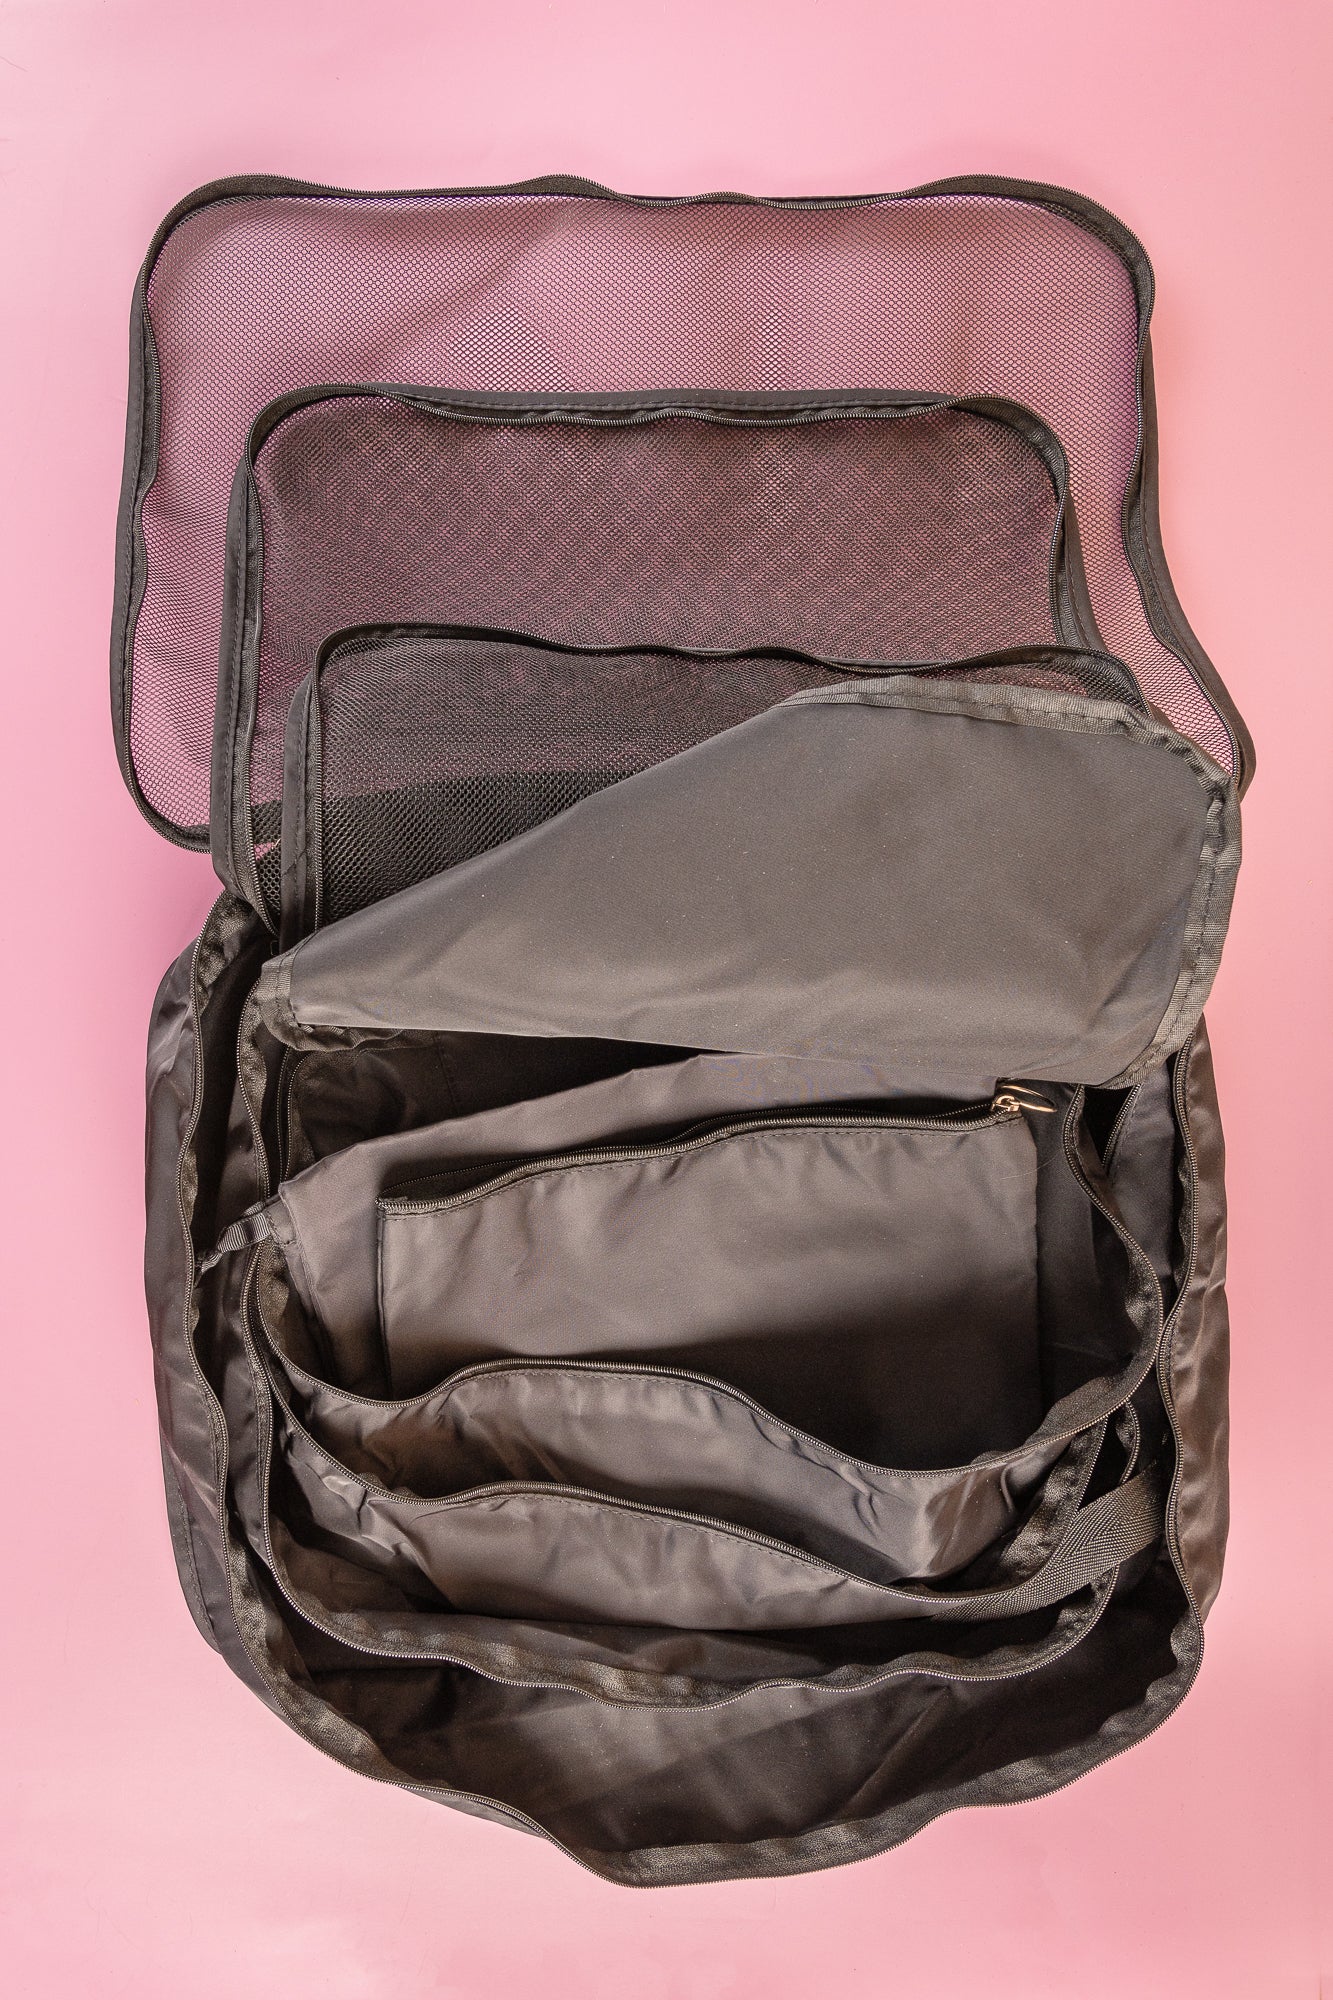 black packing cubes opened up on a pink background